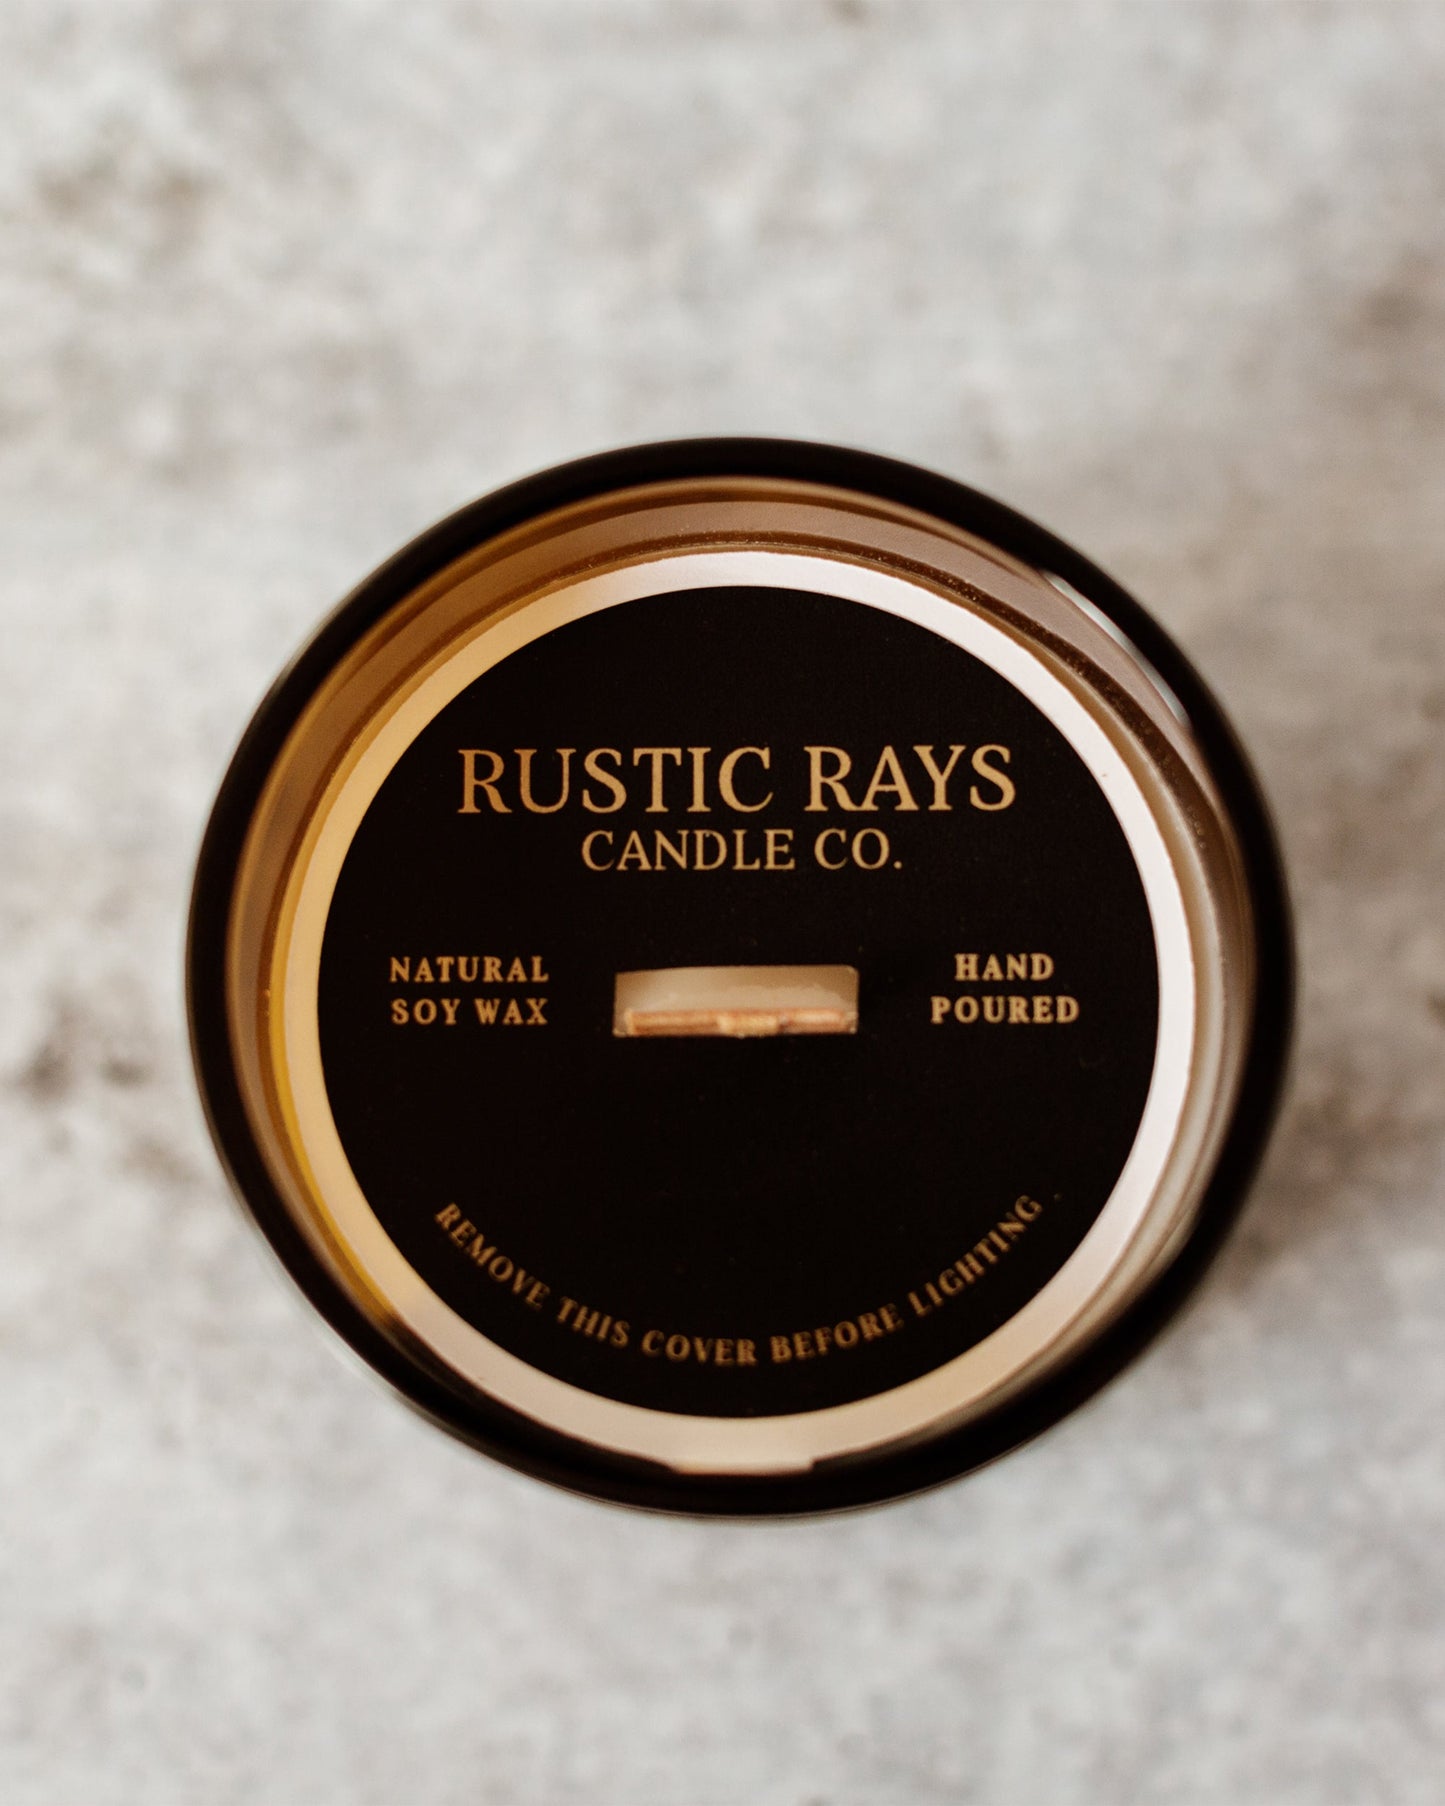 - Golden Hour Candle | 14 oz Wood Wick